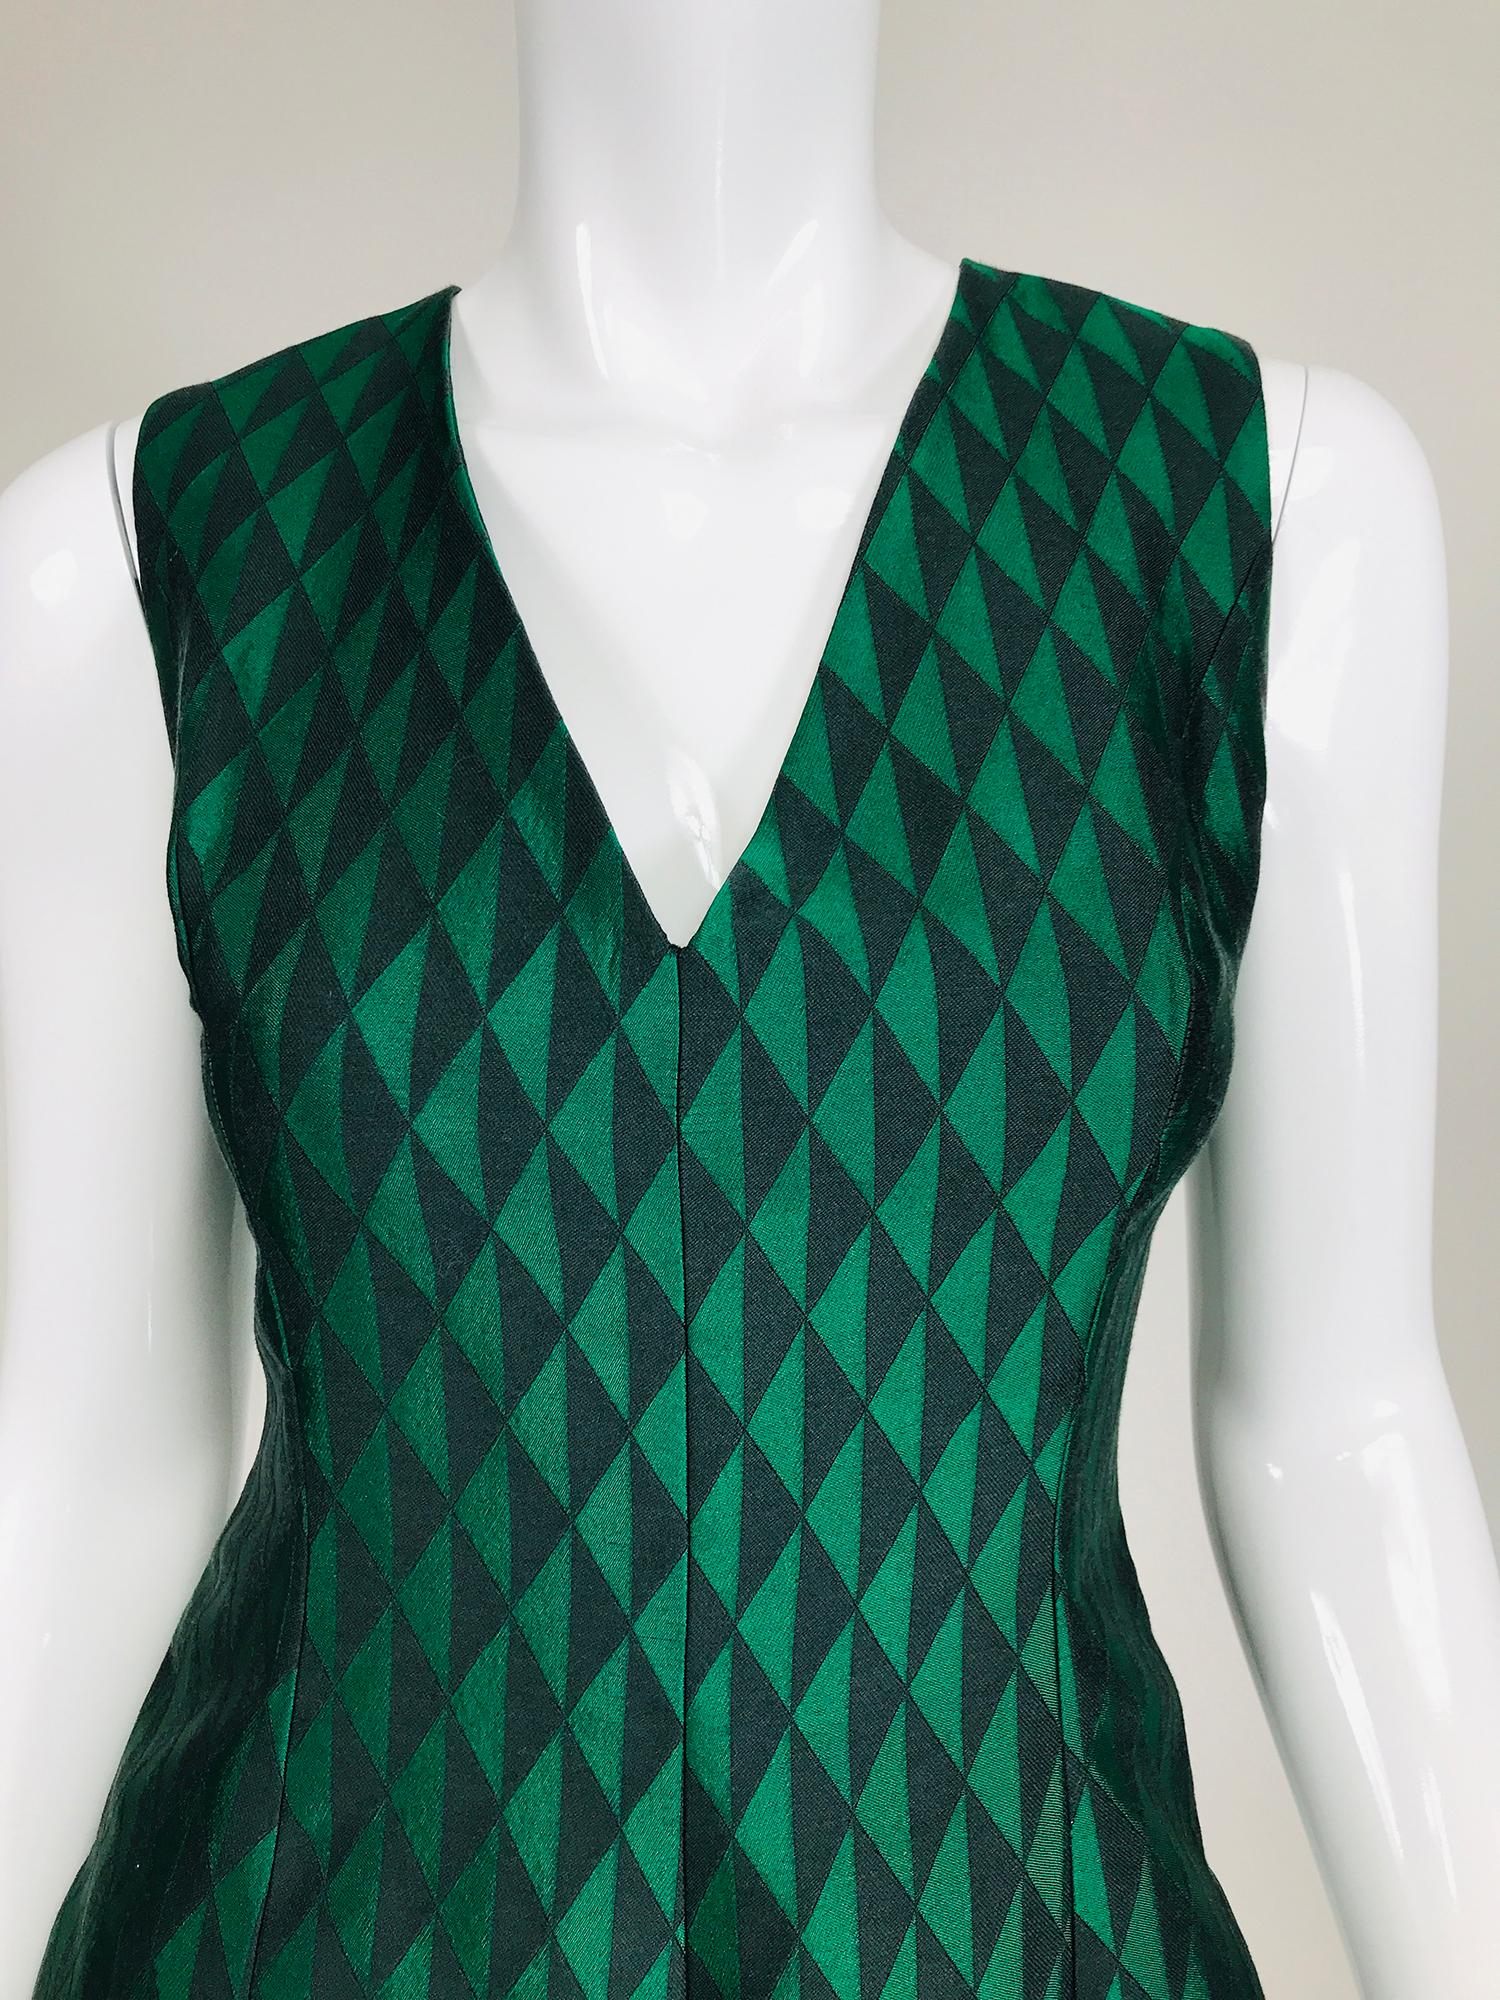 Jonathan Saunders black & green diamond dress. Woven silk & wool sleeveless, V neck dress has princess seams, the skirt is done in inverted pleats. Fully lined in black Bemberg. Closes at the back with an invisible zipper. A beautiful dress for